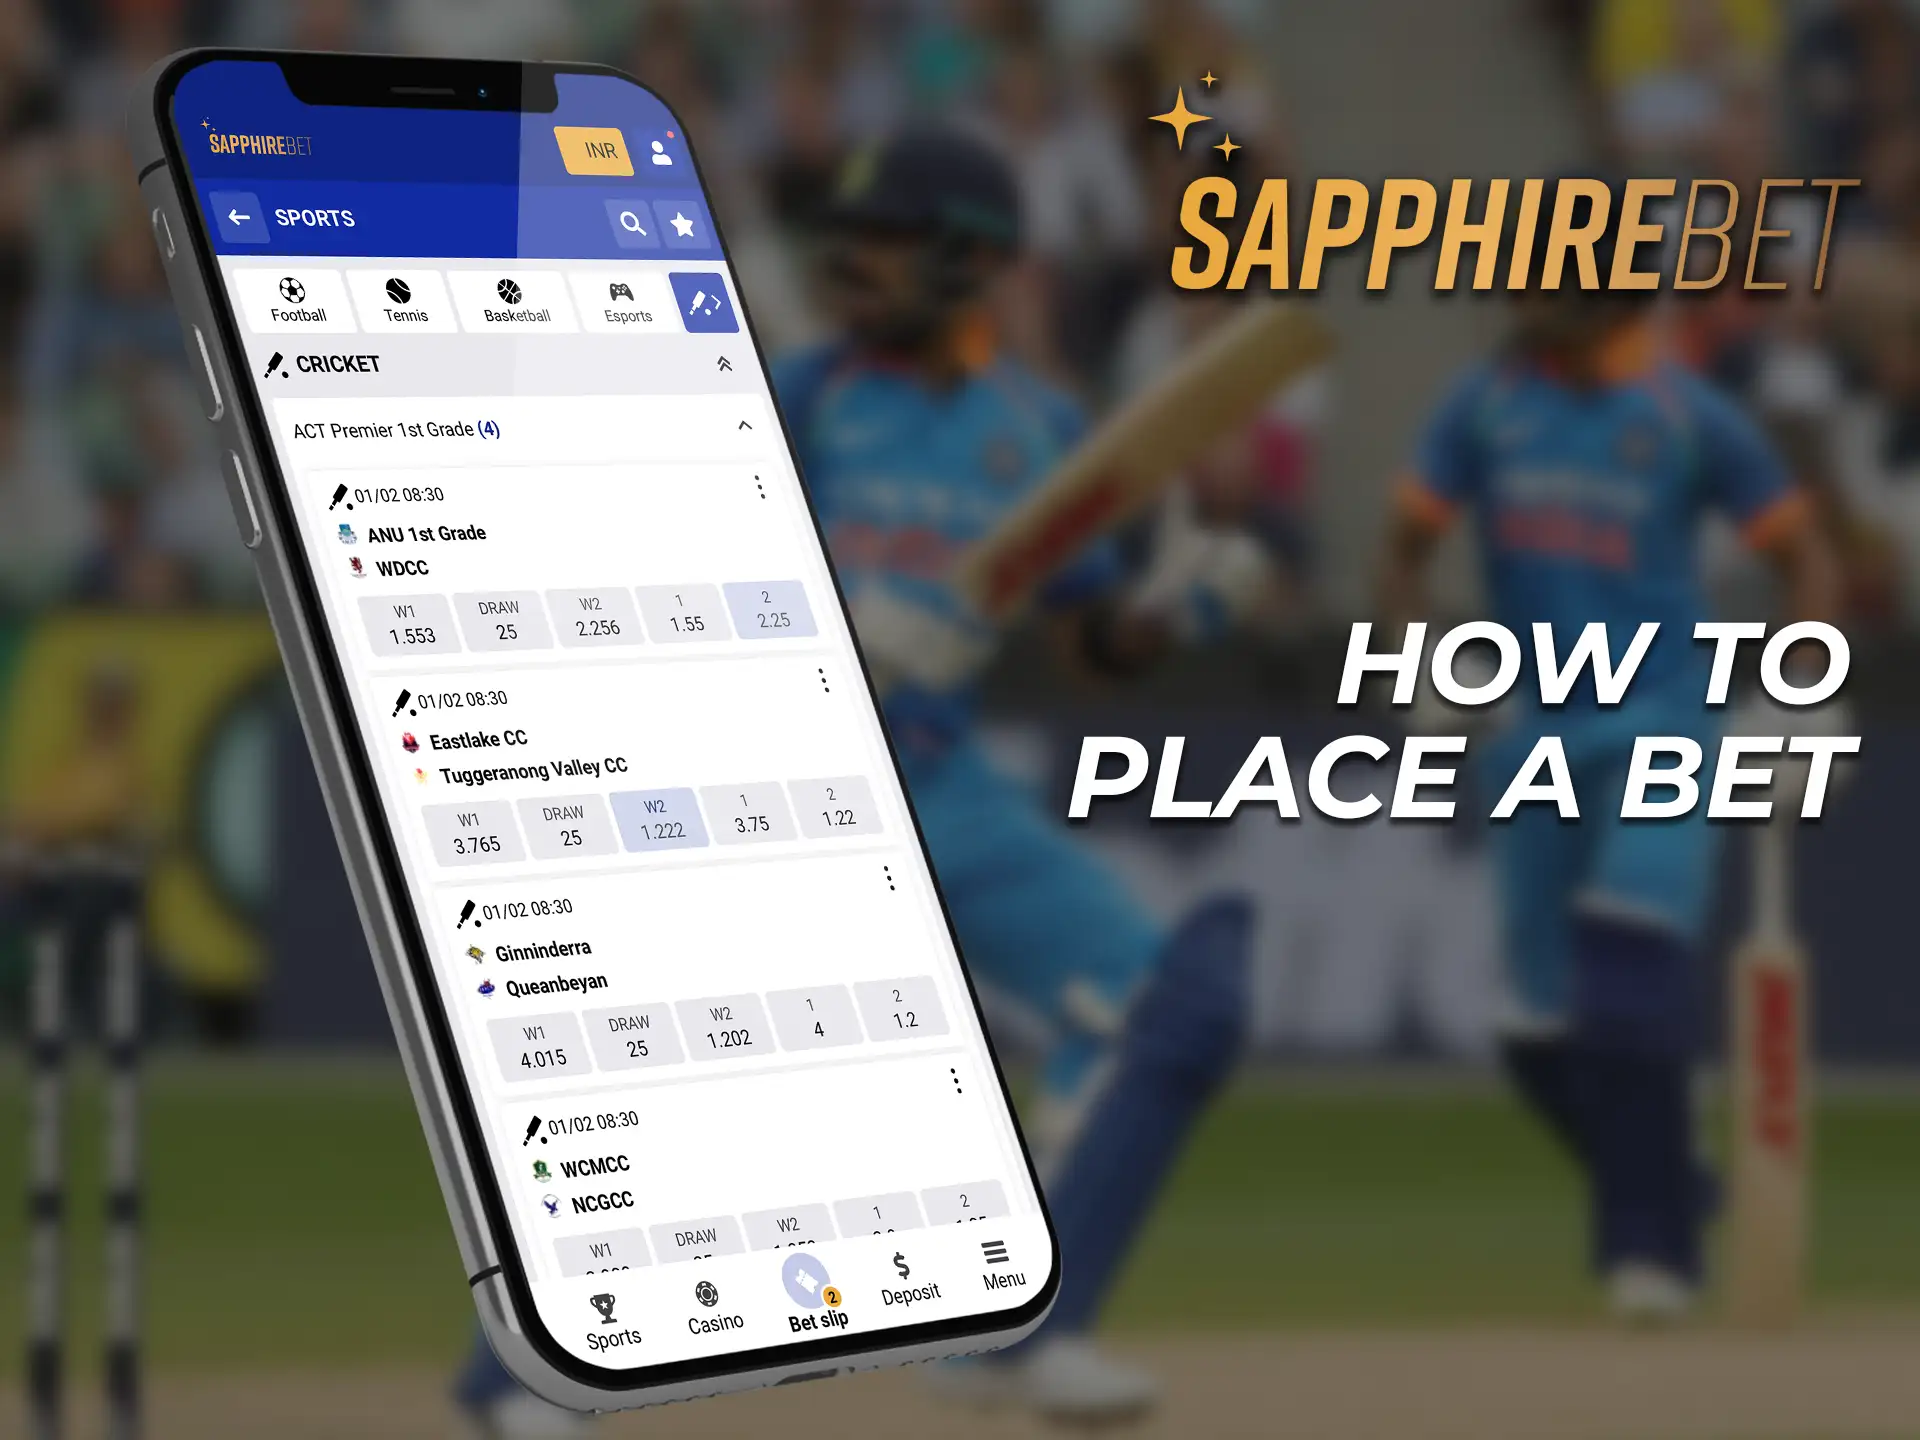 Sign up to start betting on the SapphireBet app.